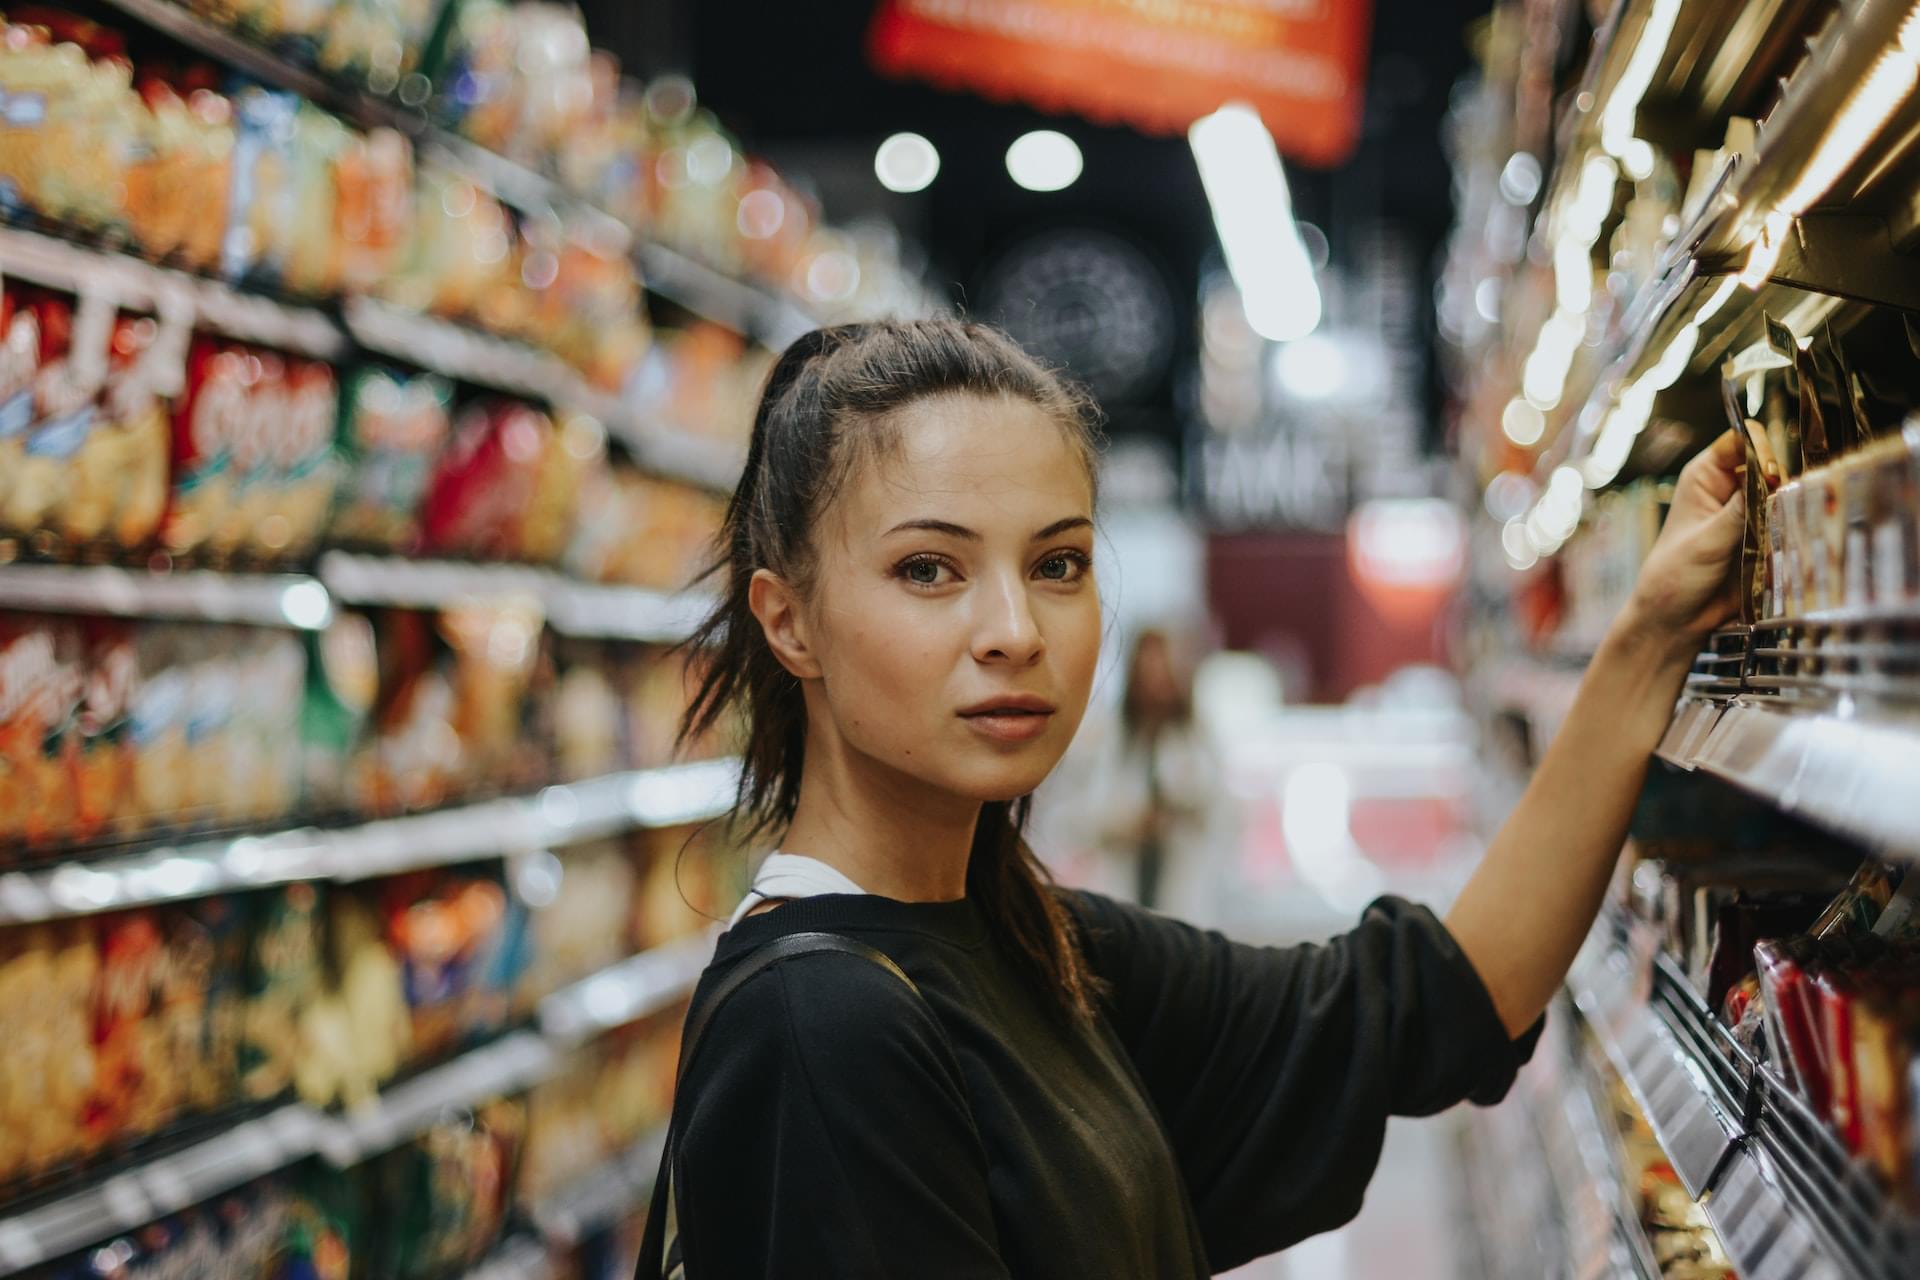 Woman stands in front of supermarket shelf and looks into camera